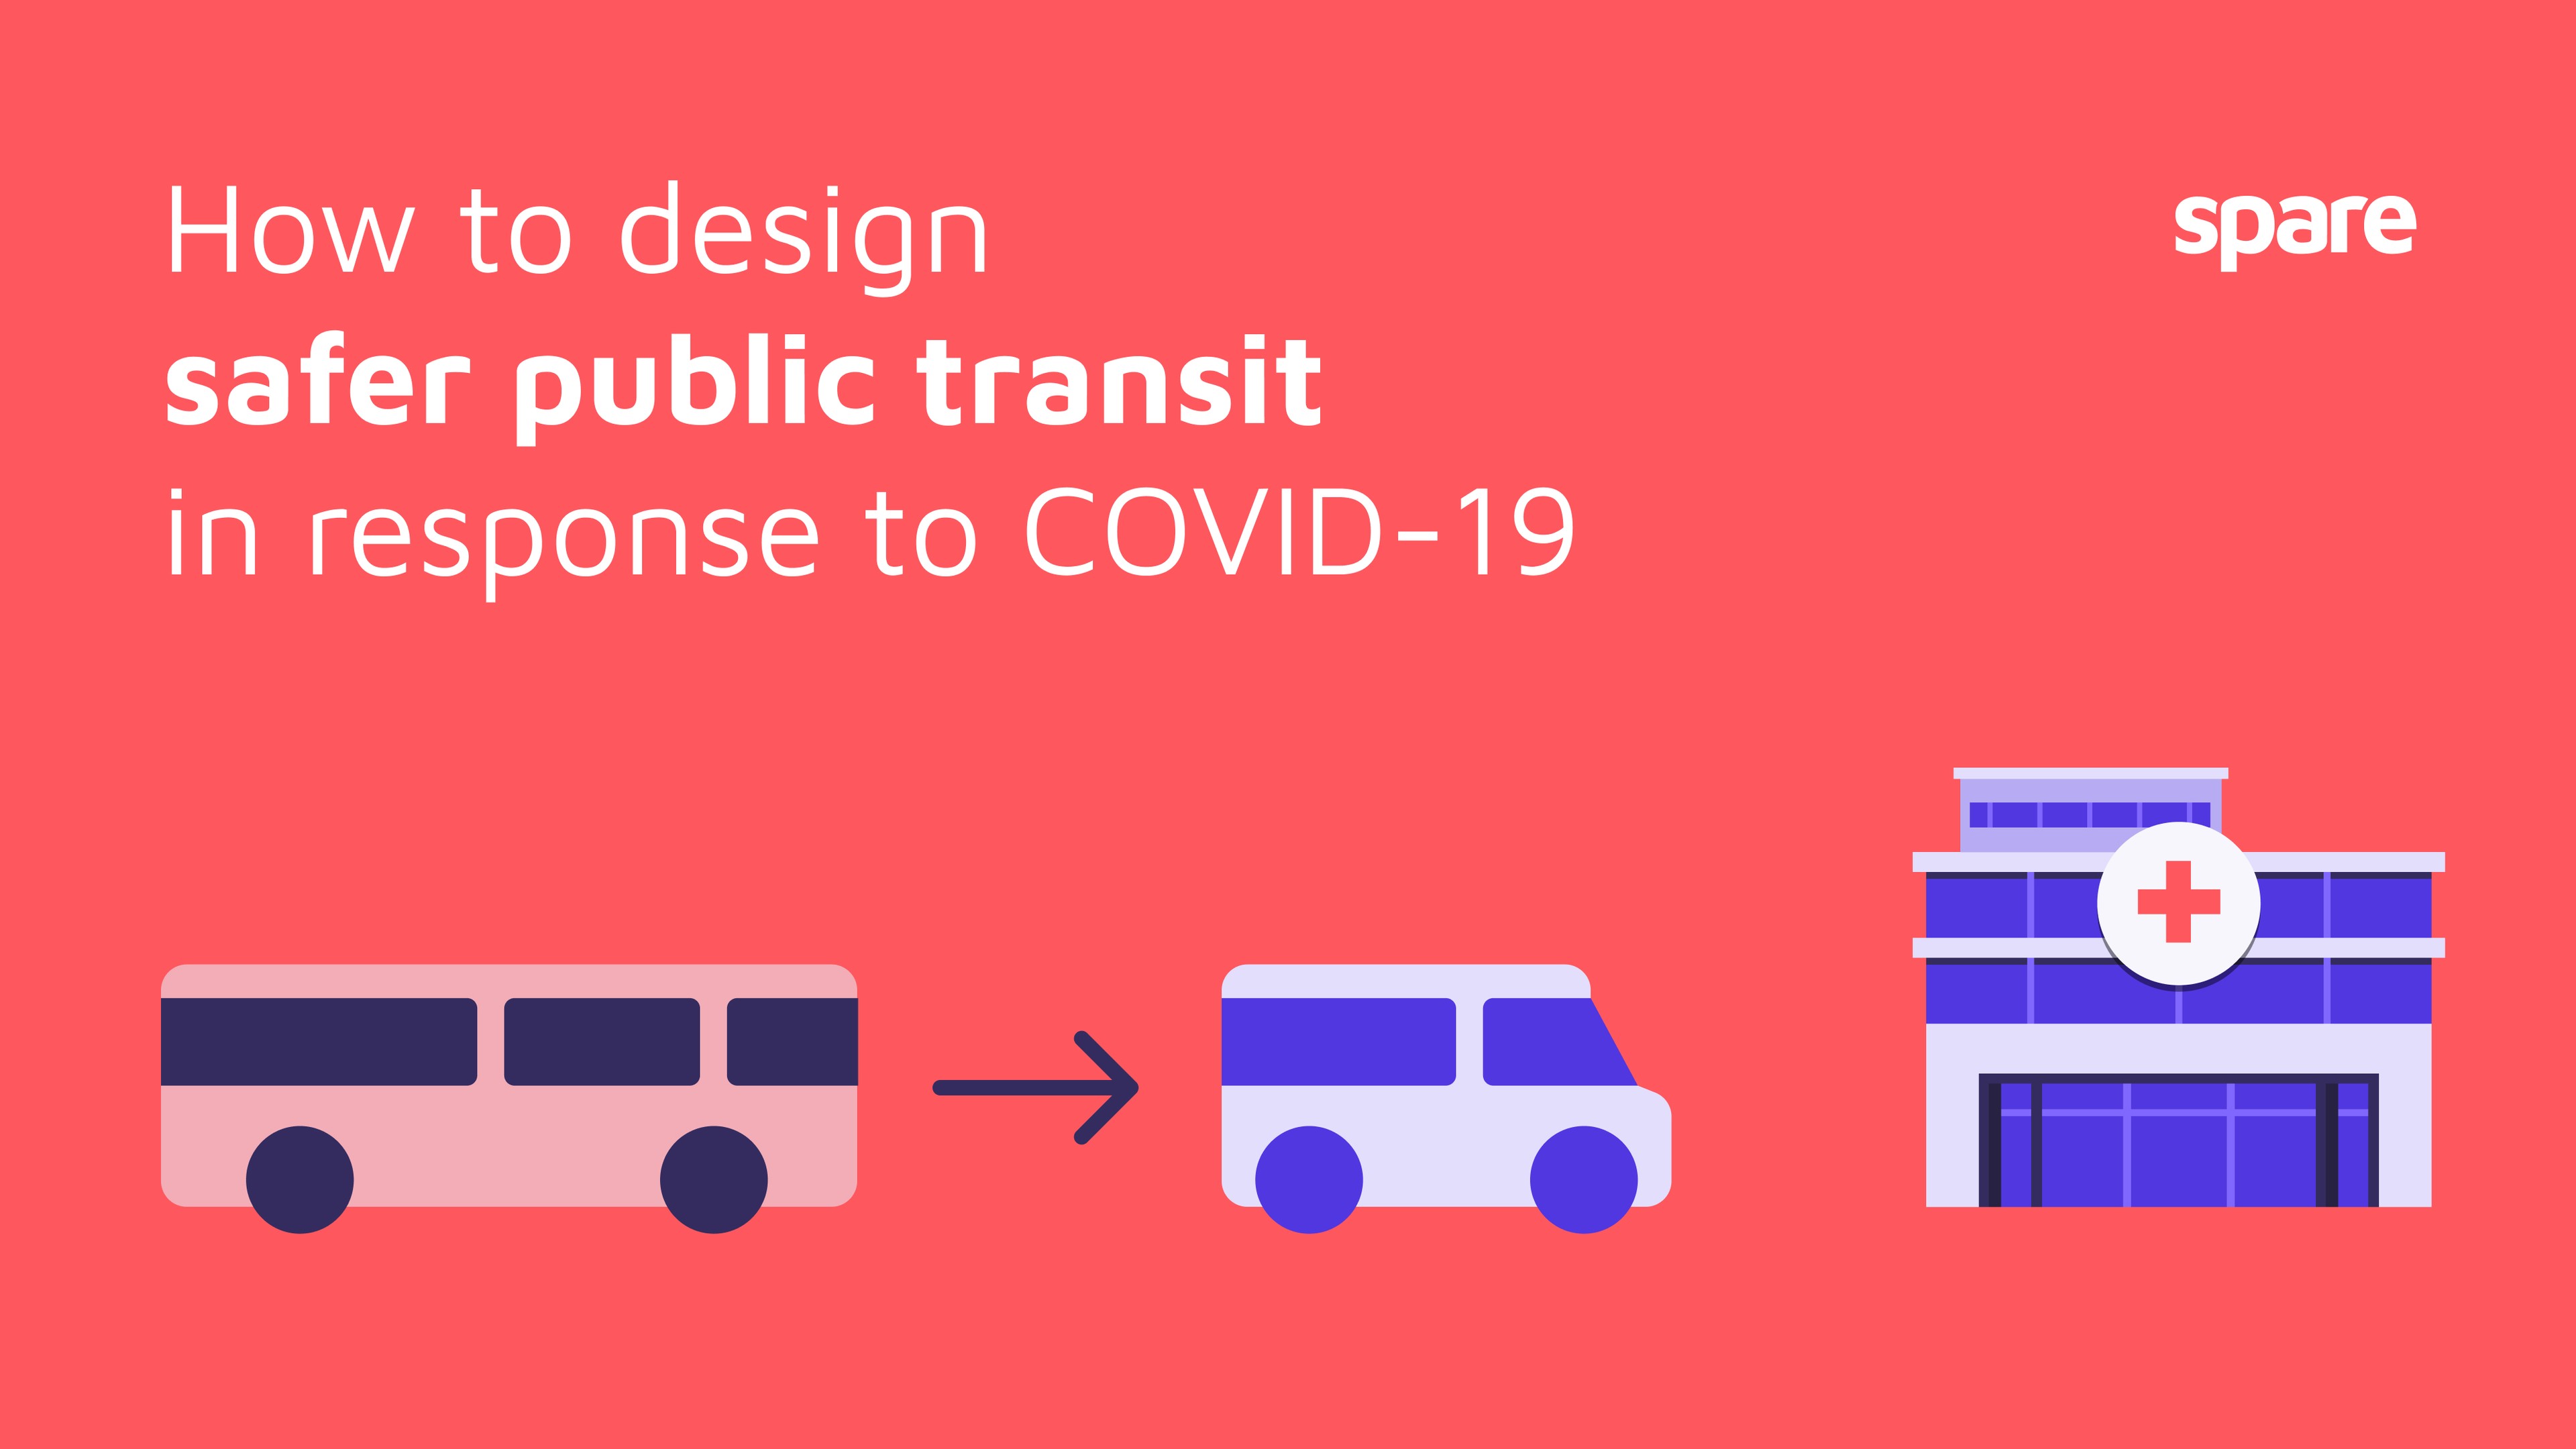 How to design safer public transit in response to COVID-19